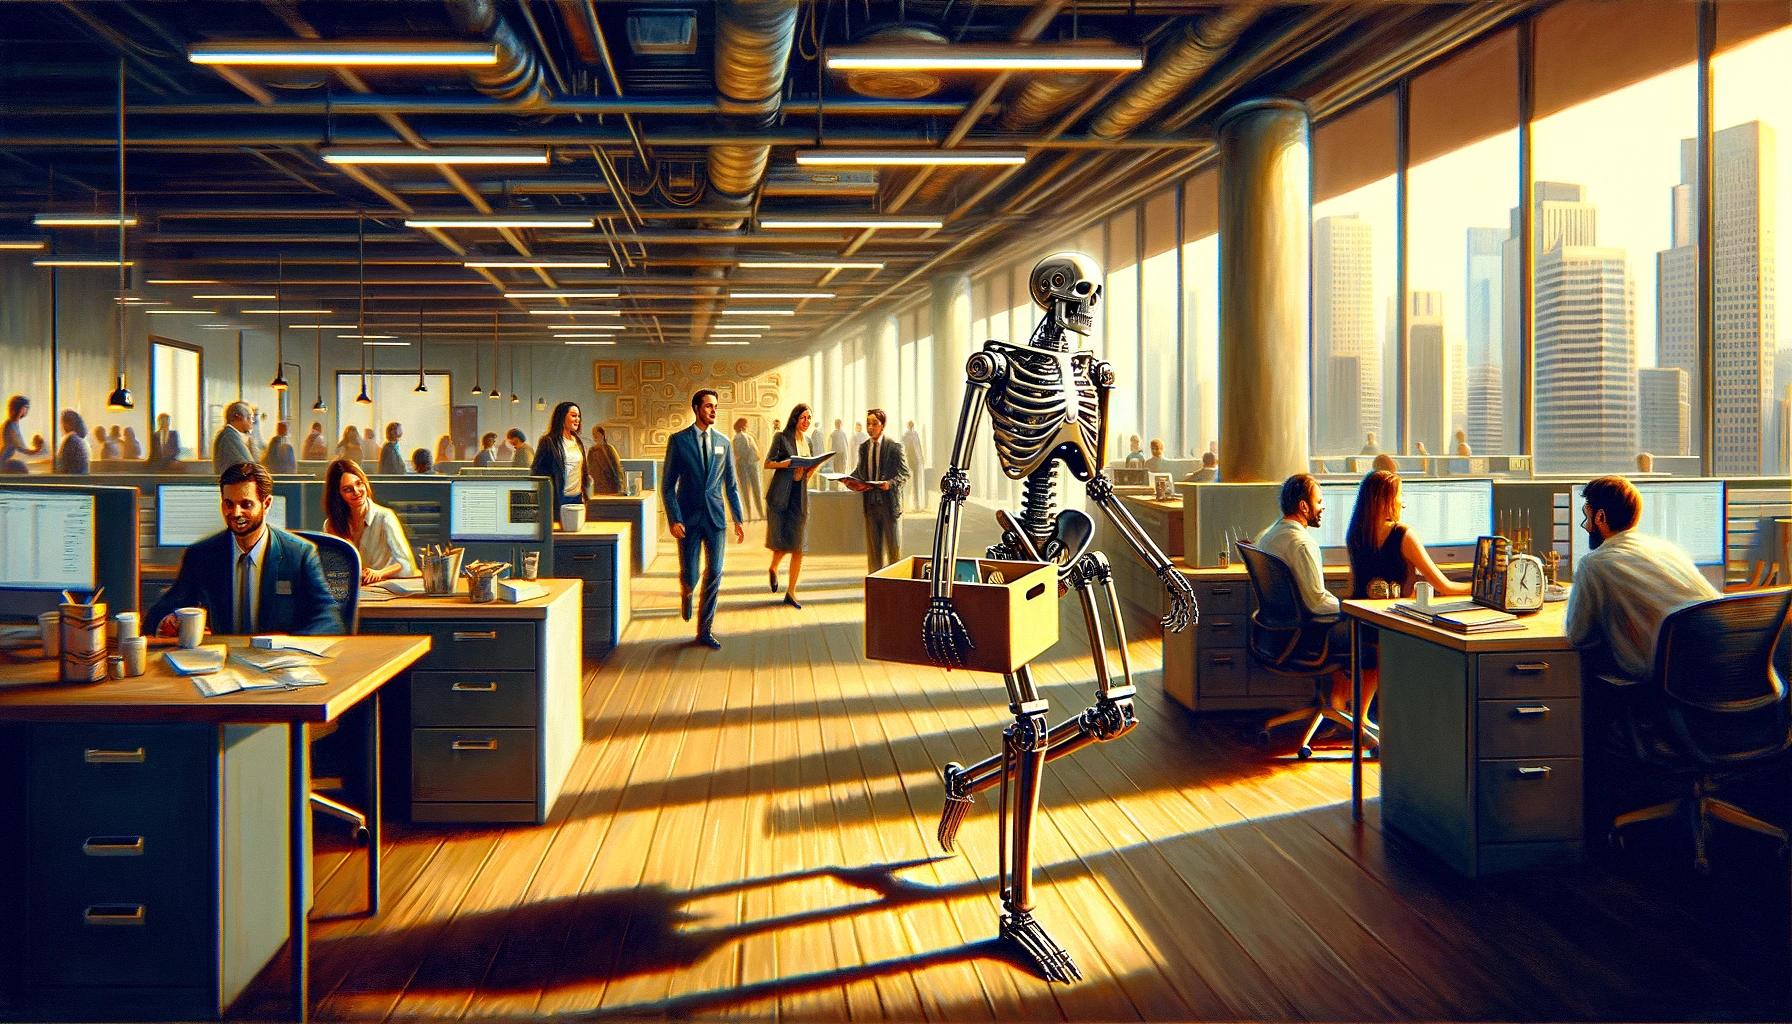 Skelly walking through an office